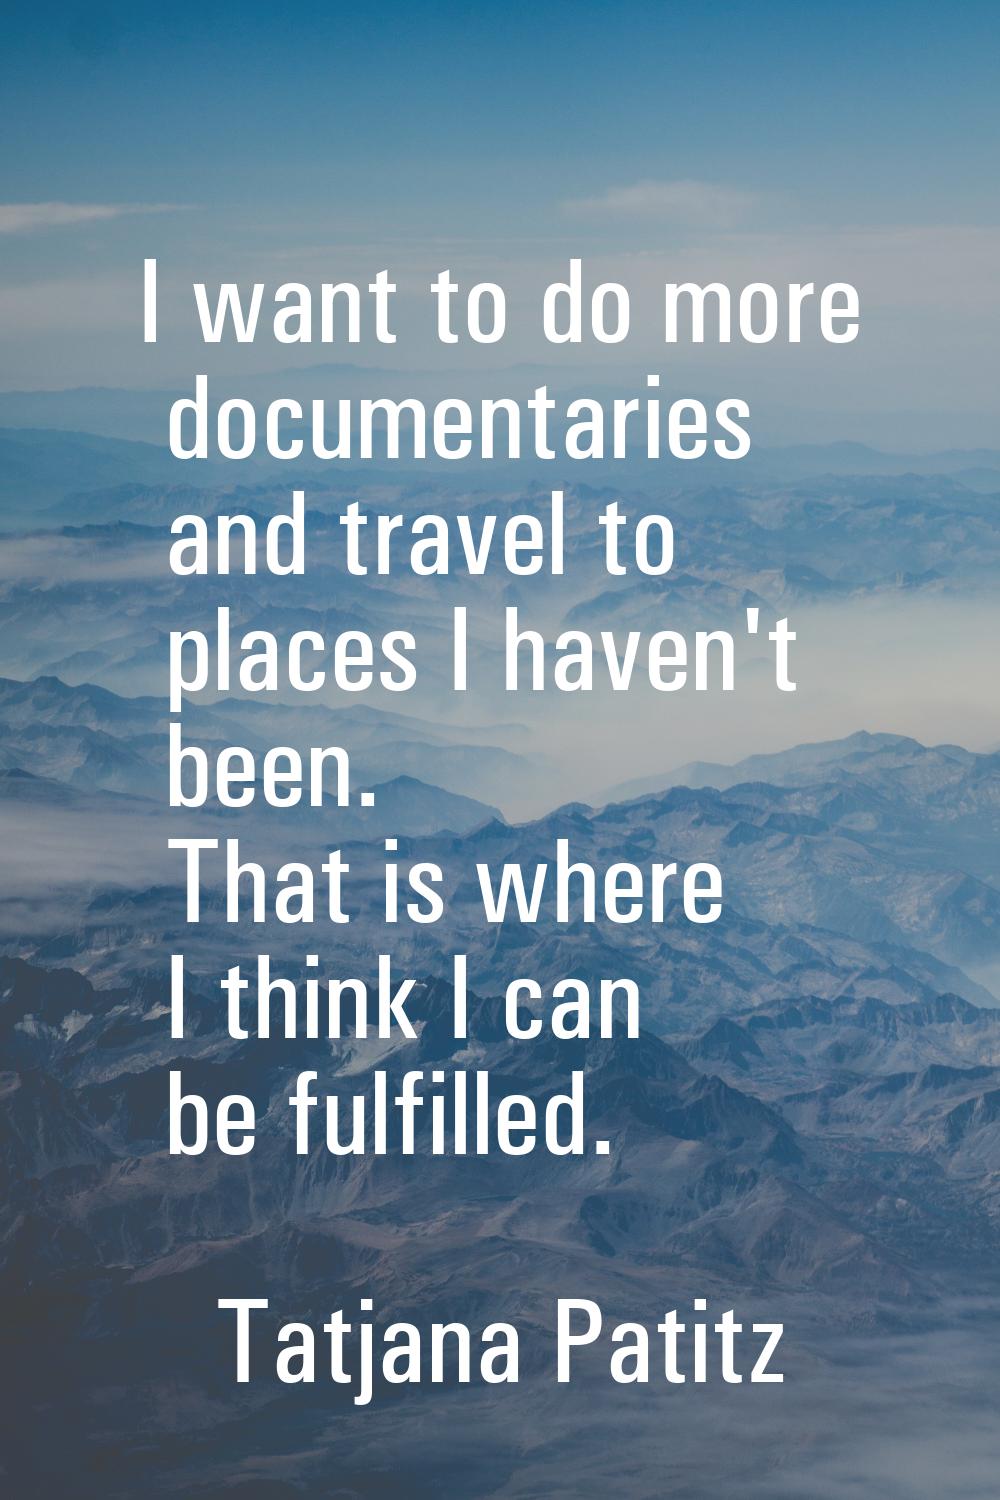 I want to do more documentaries and travel to places I haven't been. That is where I think I can be